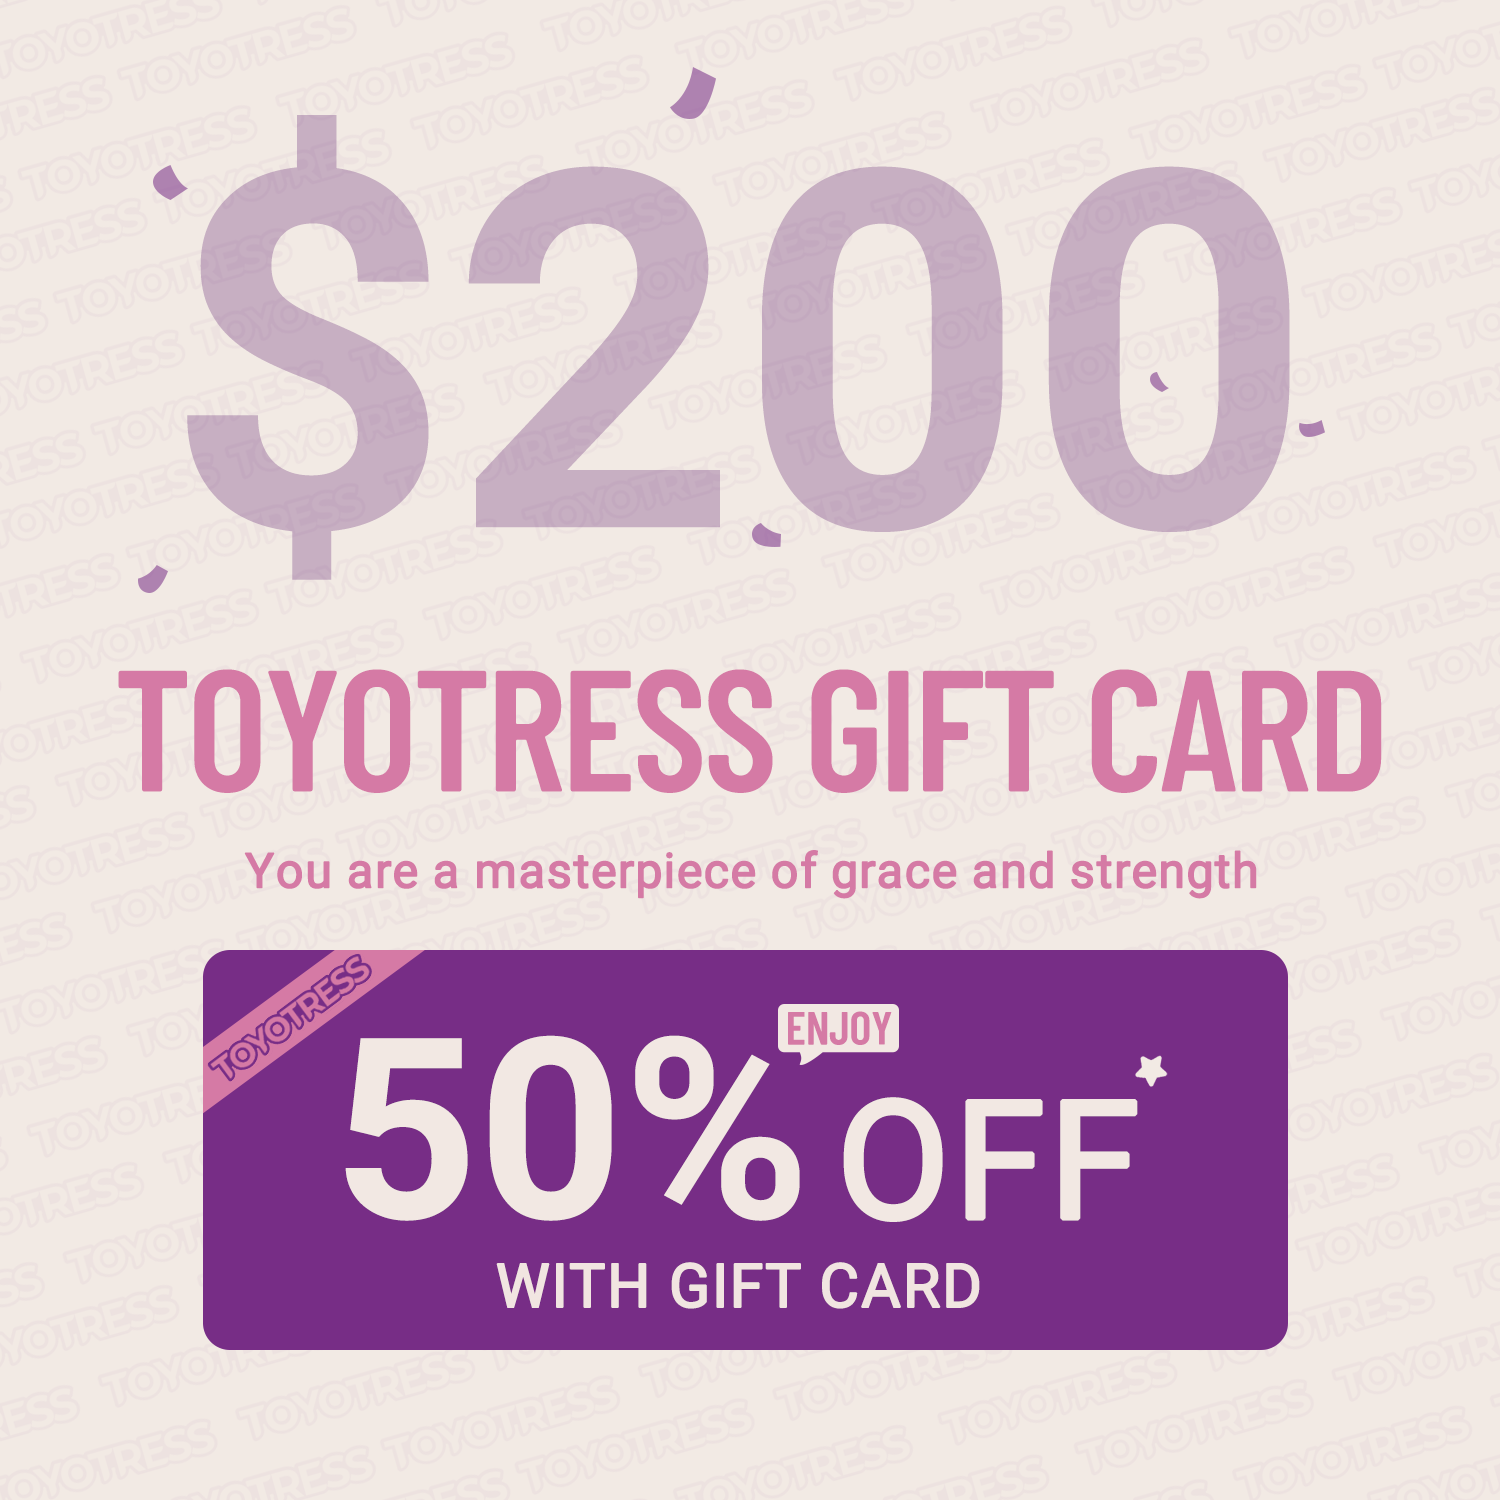 Toyotress gift card-50% off when shopping with this card